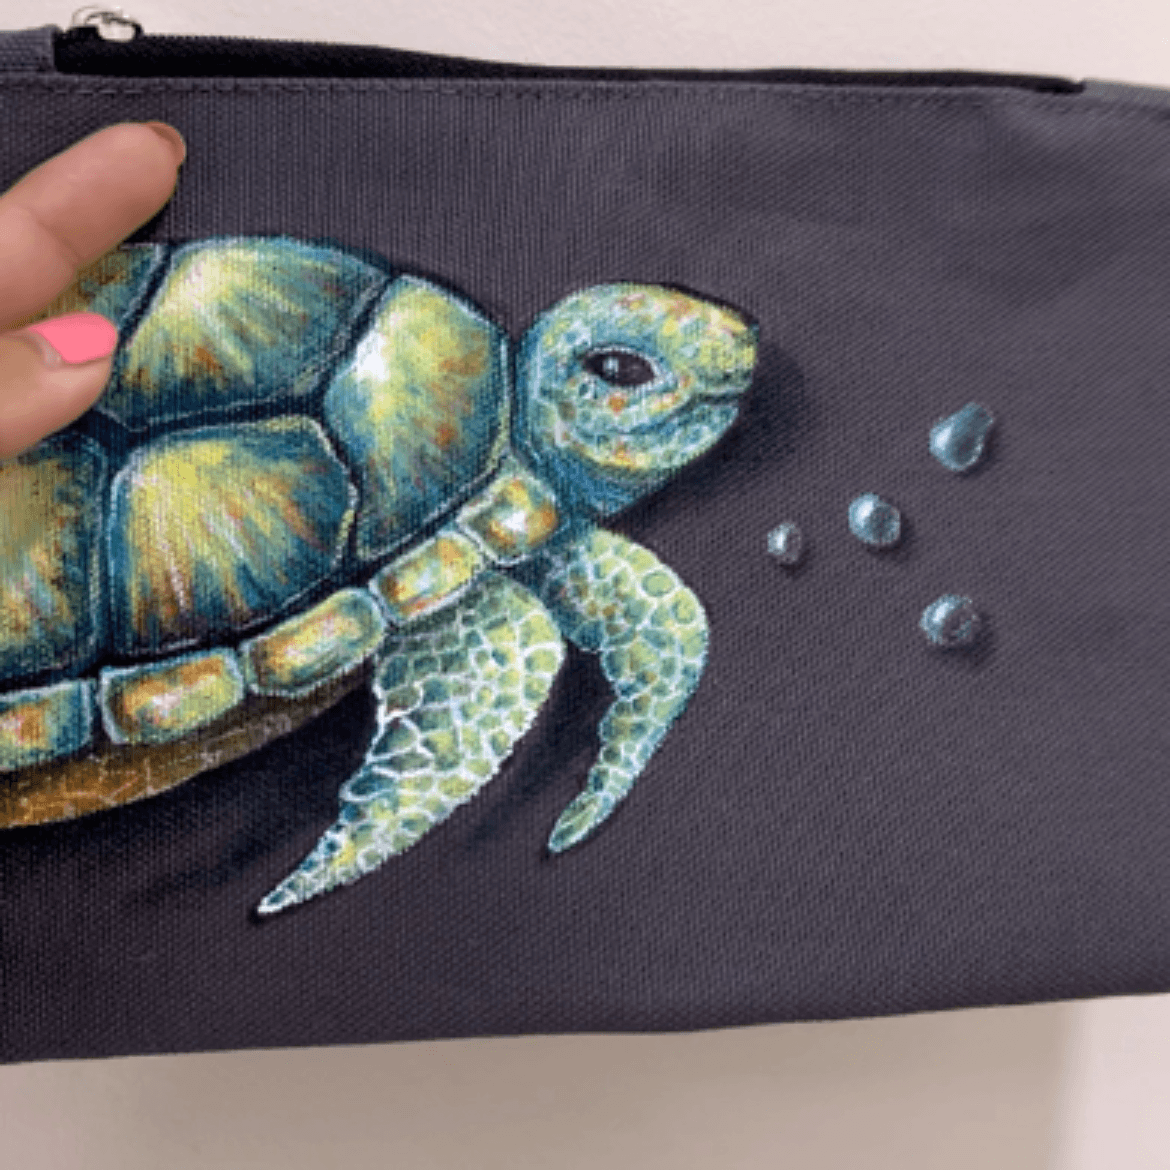 sea turtle hand painted on a fabric pouch